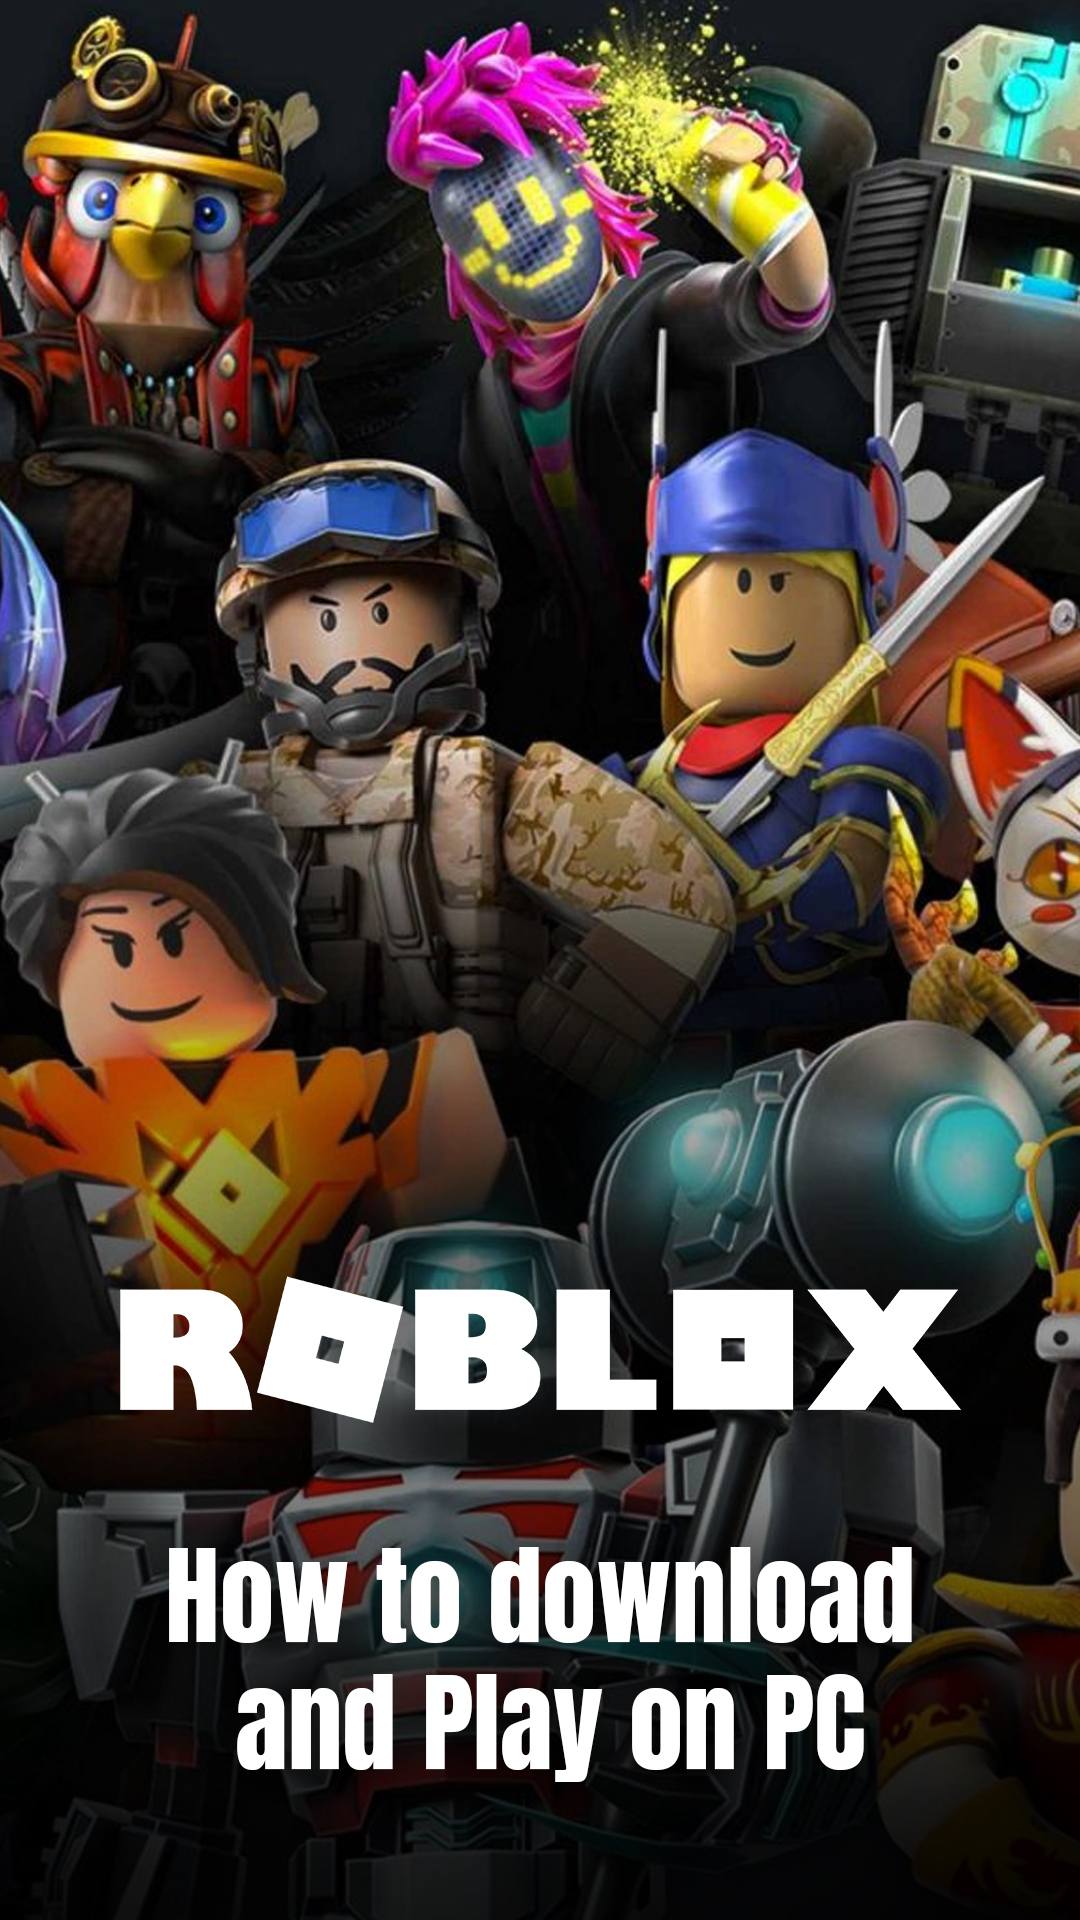 How to Download and Play Roblox on PC